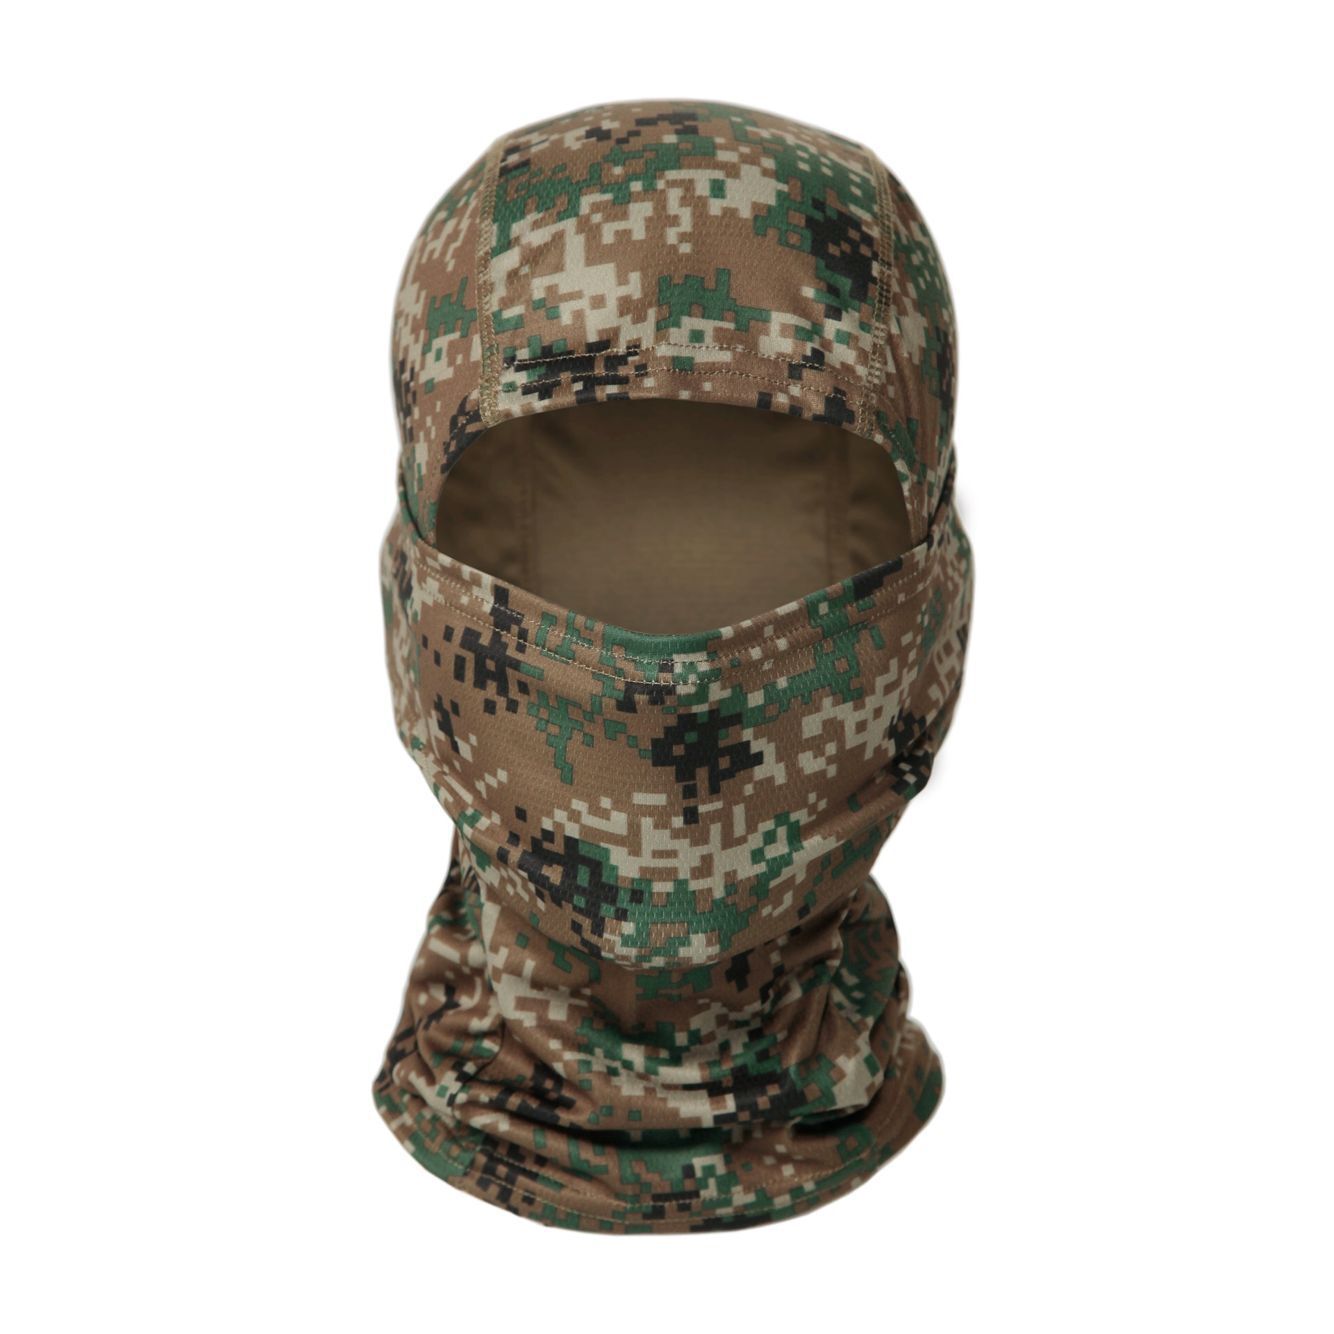 Tactical Camouflage Balaclava Full Face Scarf Mask High Quality | eBay